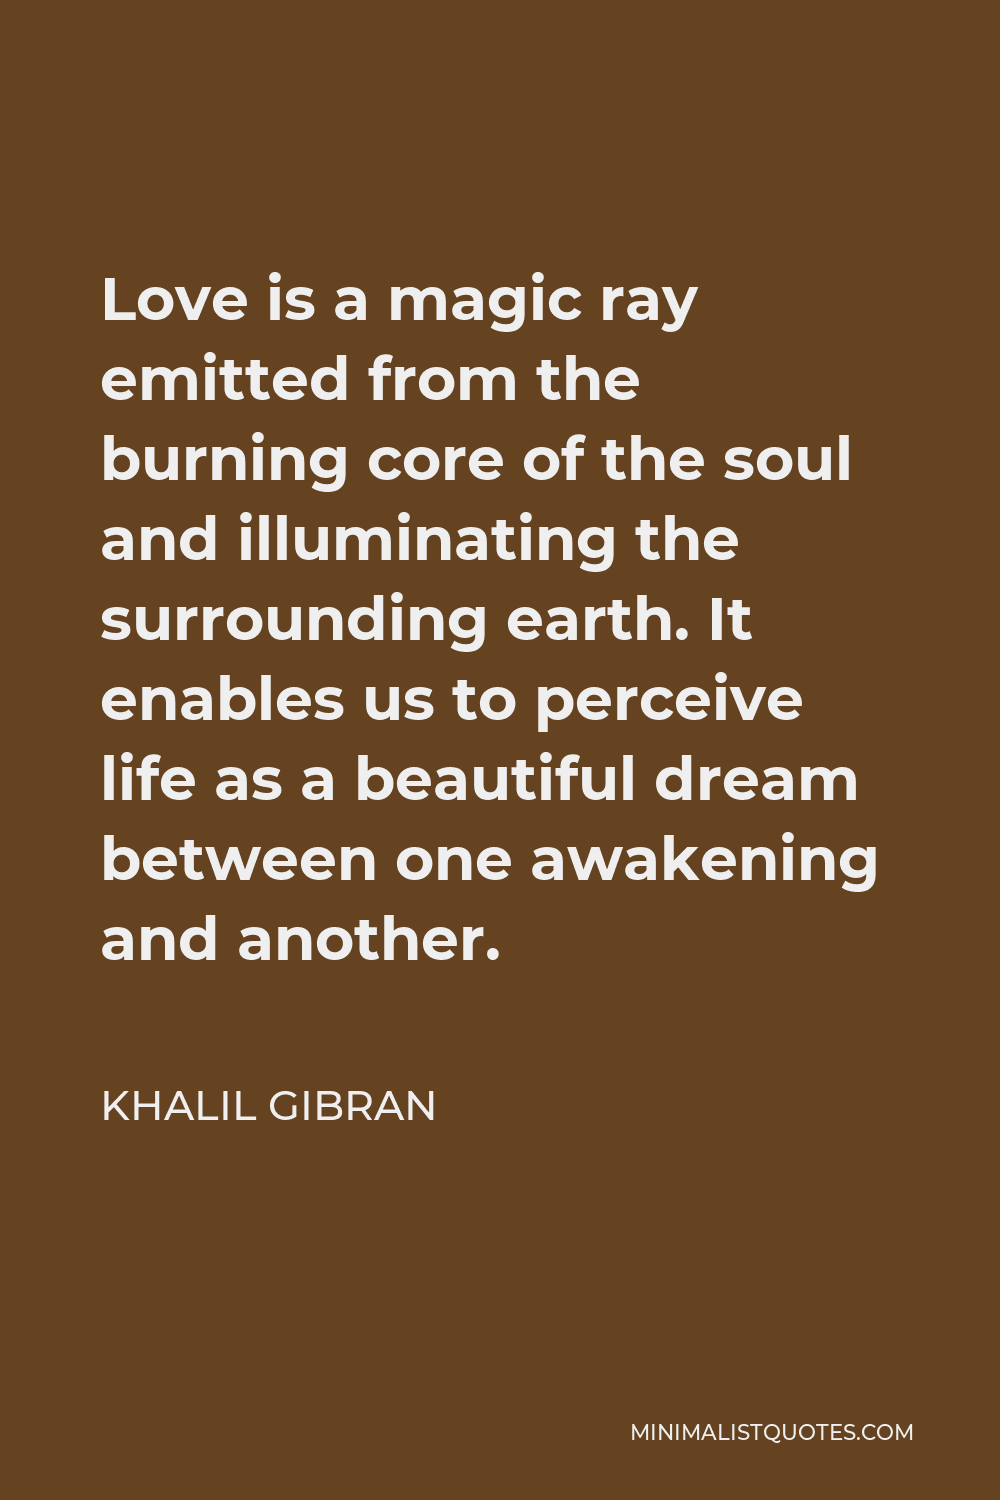 Khalil Gibran Quote - Love is a magic ray emitted from the burning core of the soul and illuminating the surrounding earth. It enables us to perceive life as a beautiful dream between one awakening and another.